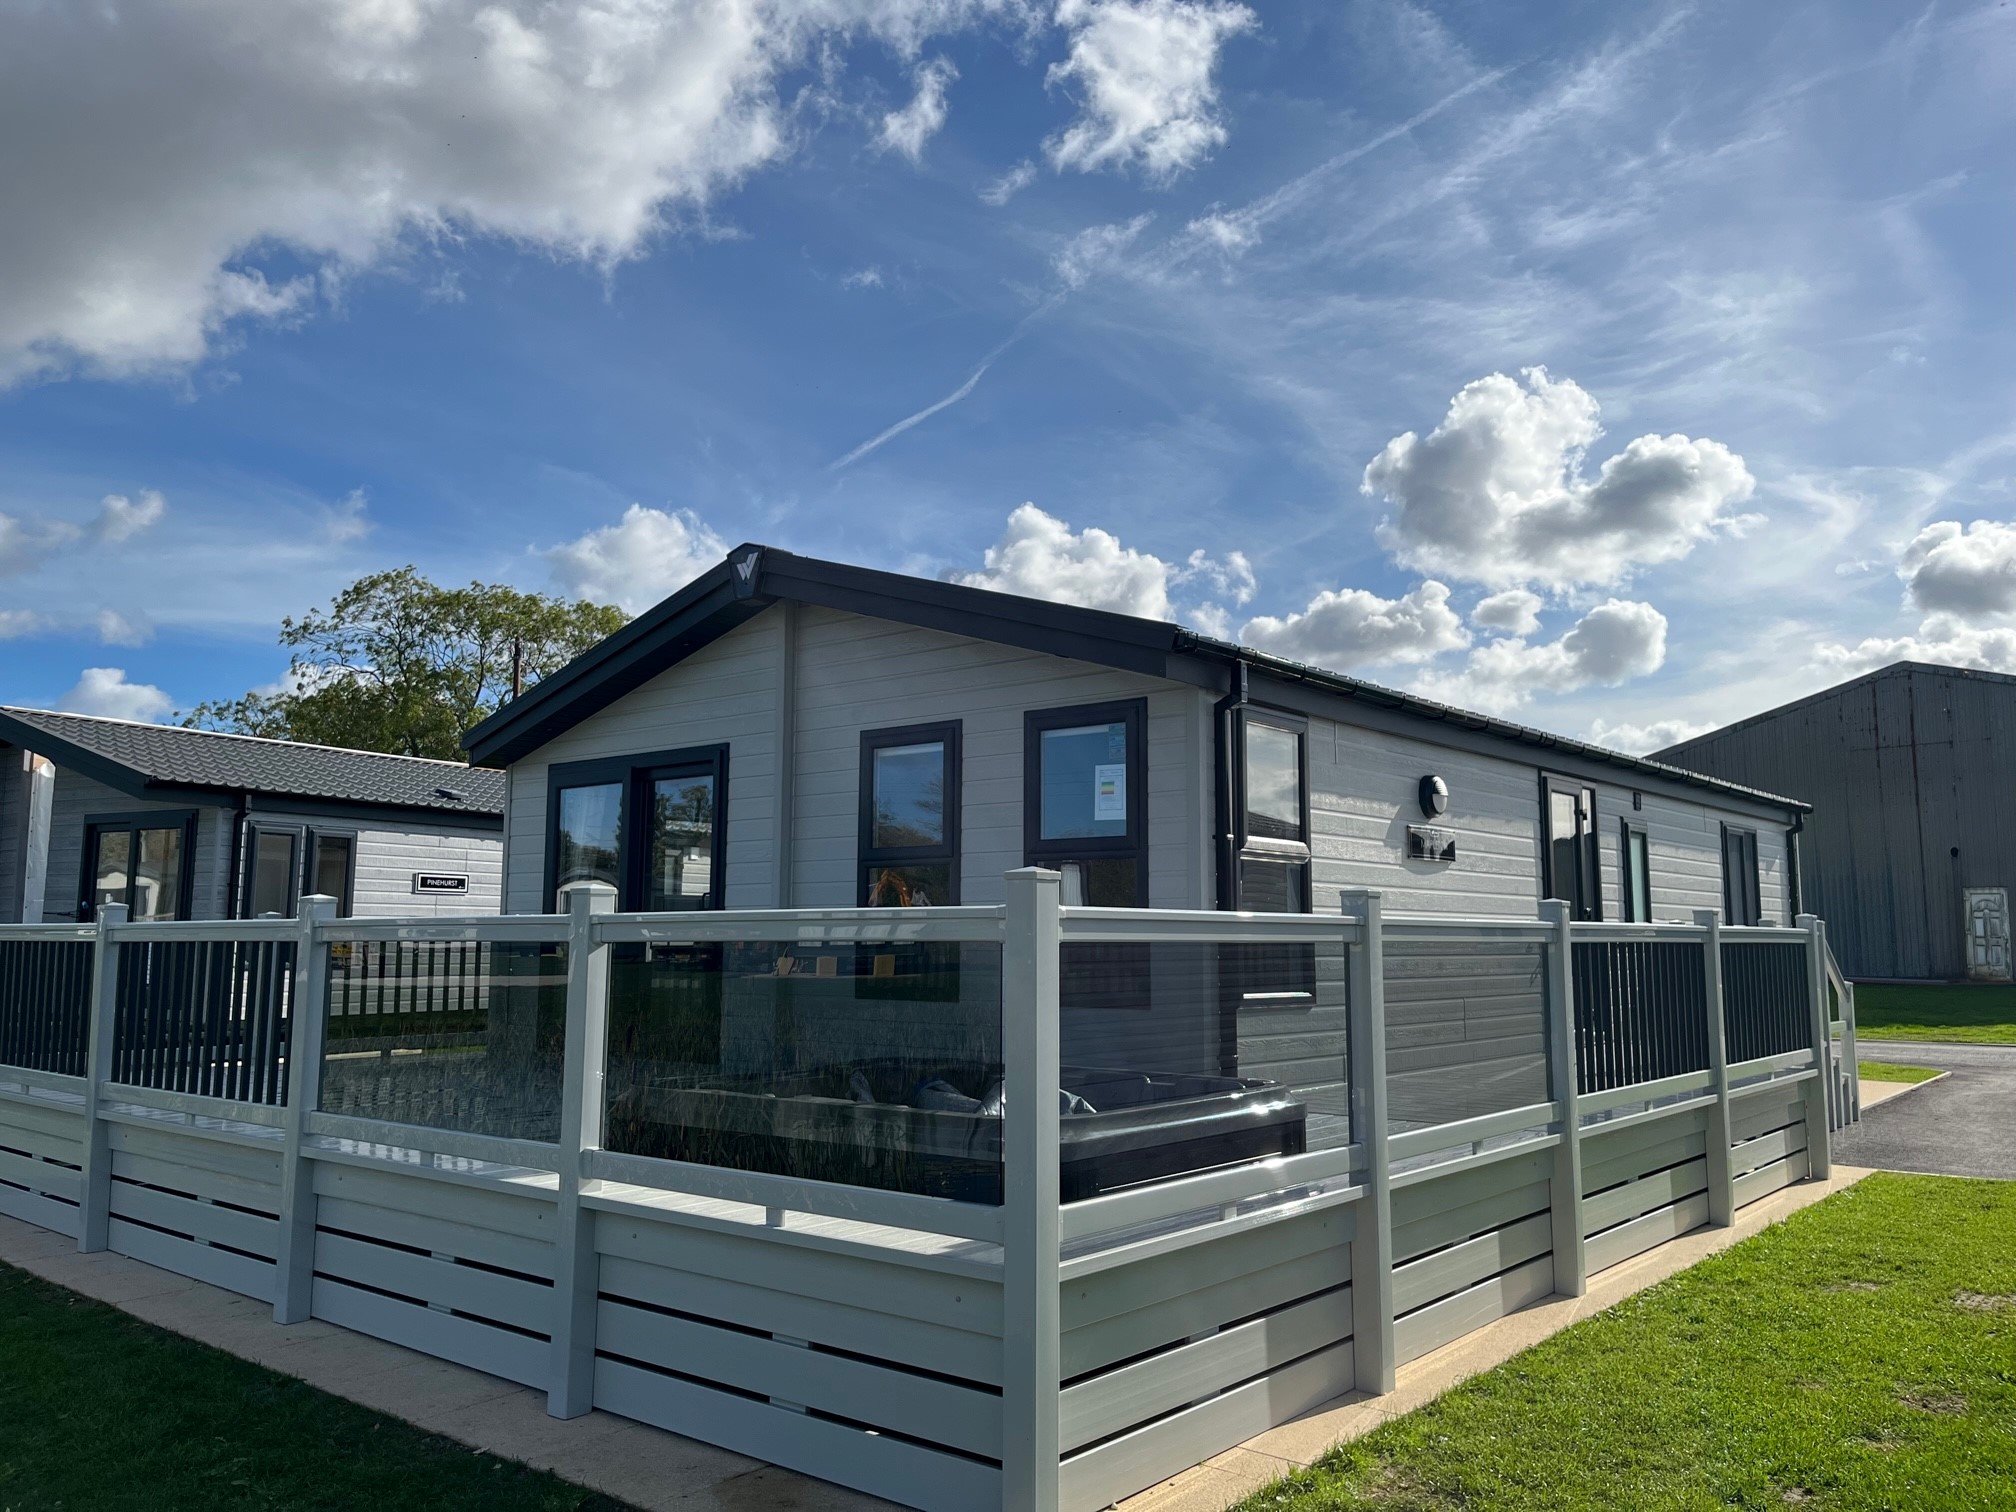 New 2022 Willerby Mapleton Lodge 3 Bedroom 40’x20′ with hot tub – HELSEY FARM PARK (52 WEEK ALL YEAR ROUND SEASON) – 2024 site fees included